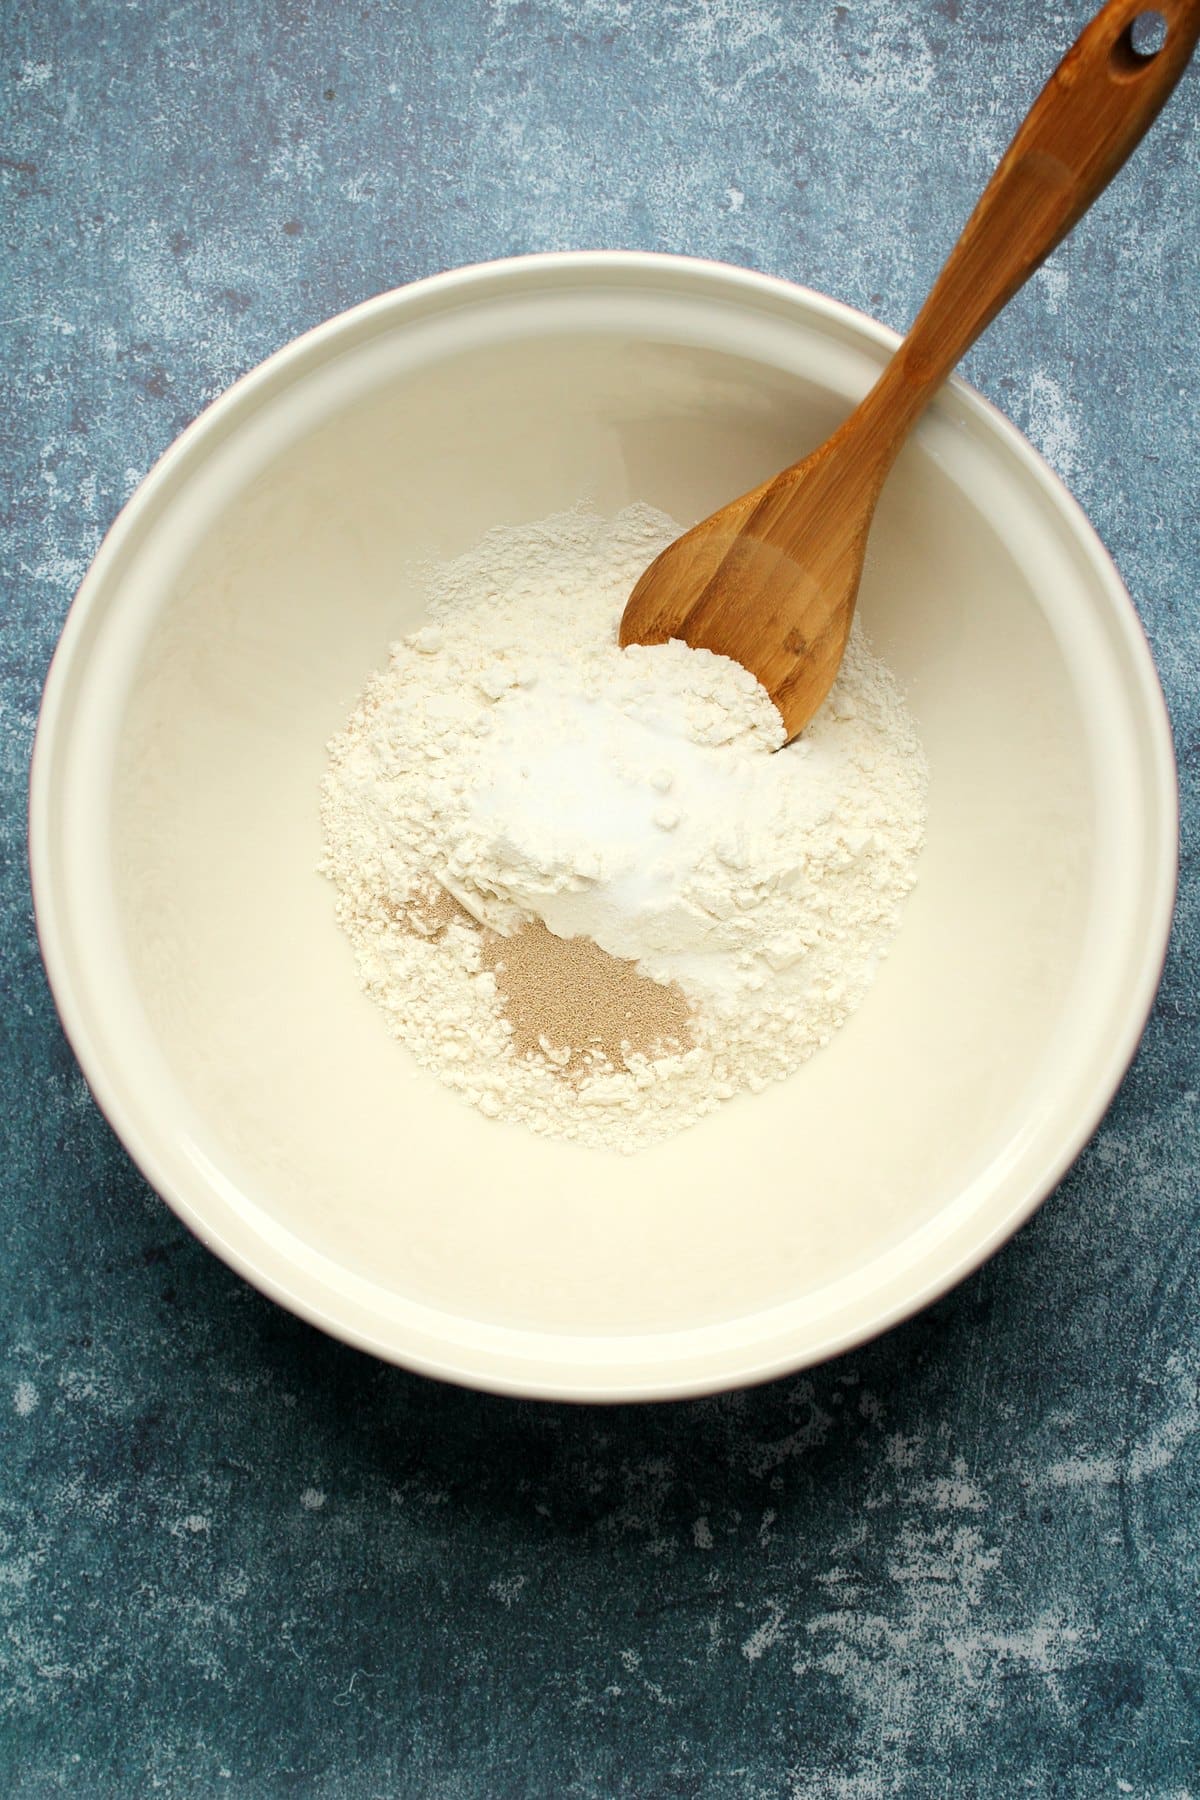 Dry ingredients added to mixing bowl. 